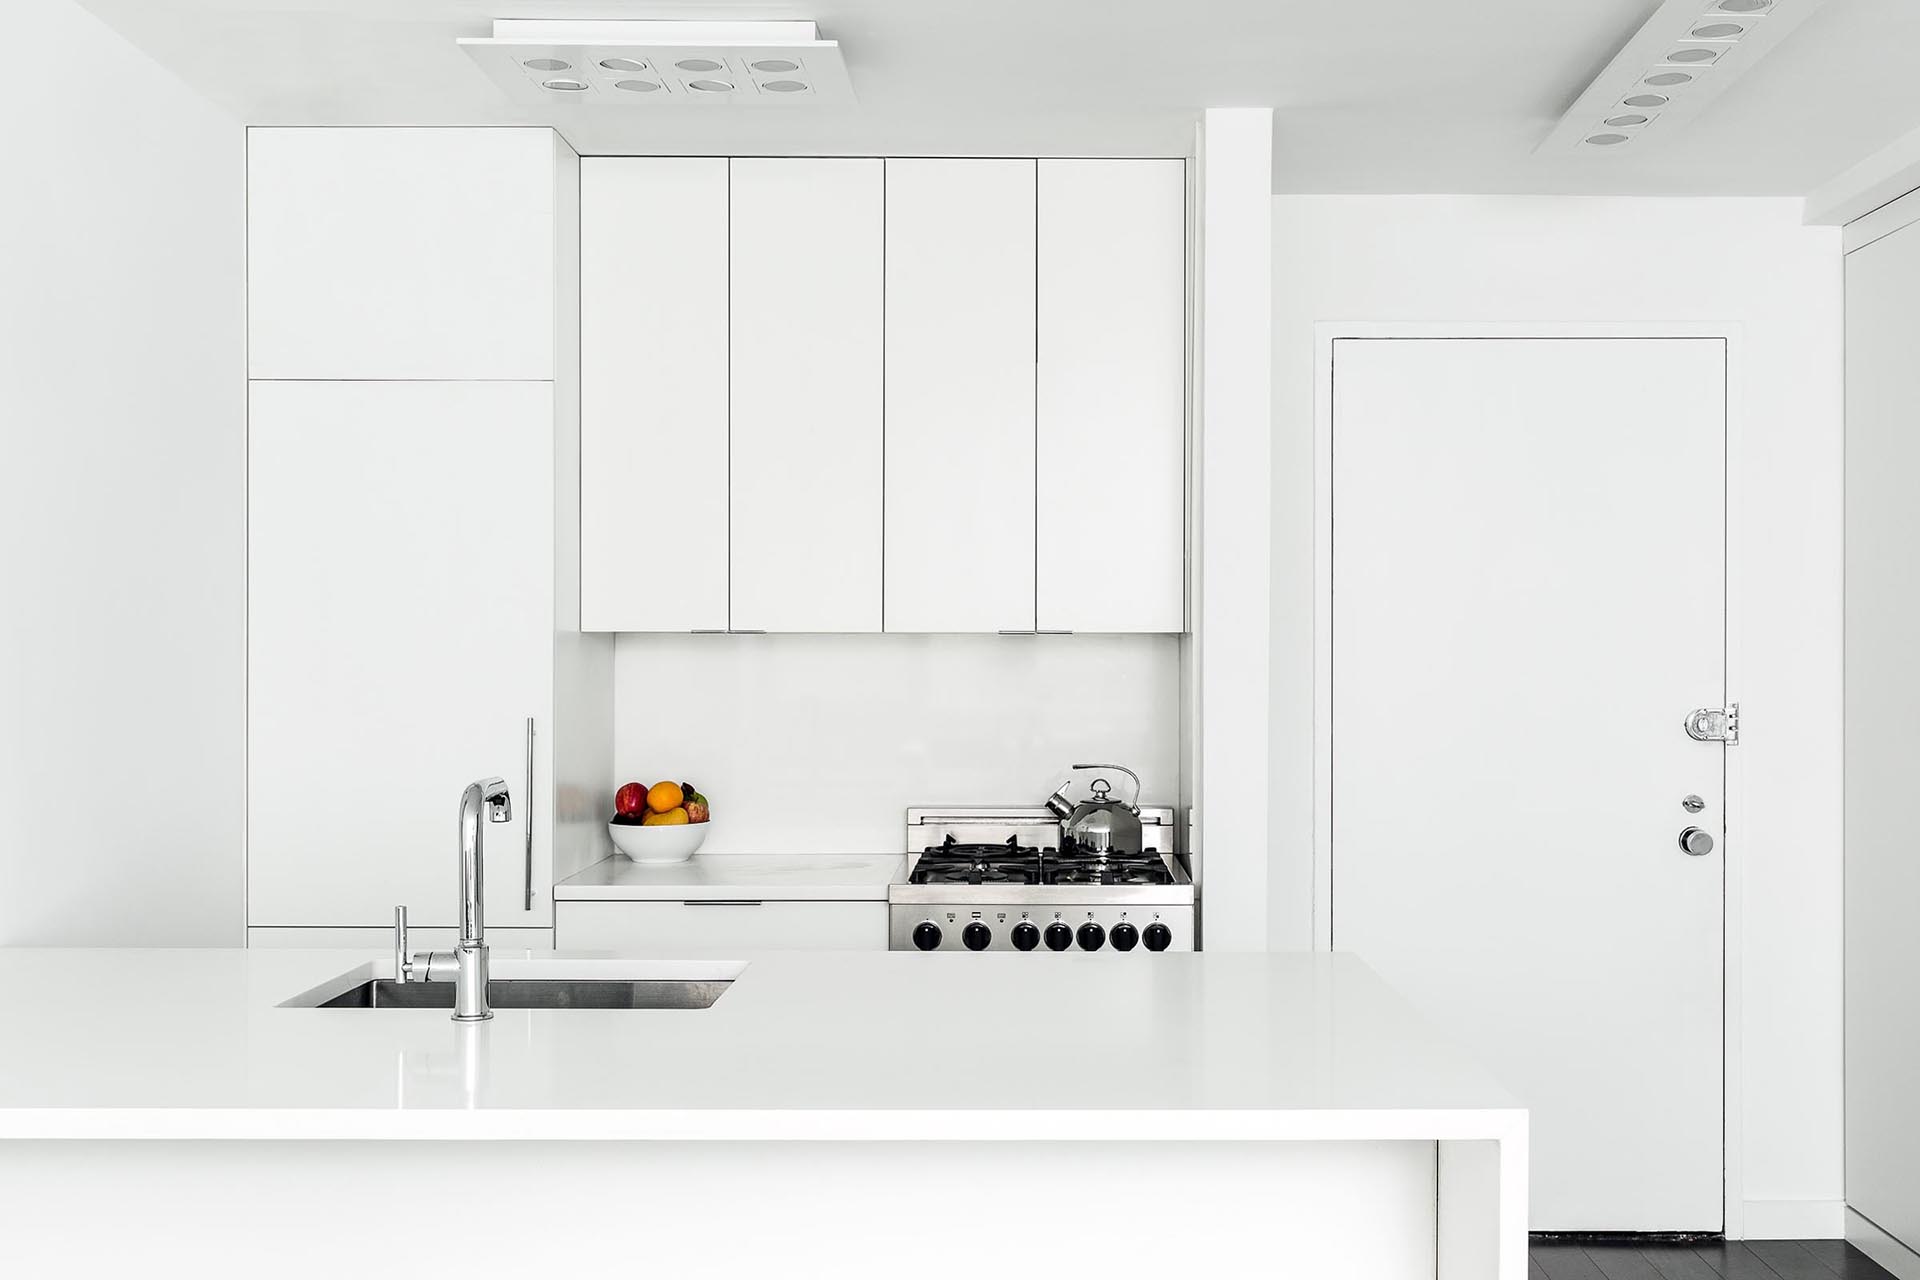 A modern small white kitchen with an integrated fridge and hardware free cabinets.